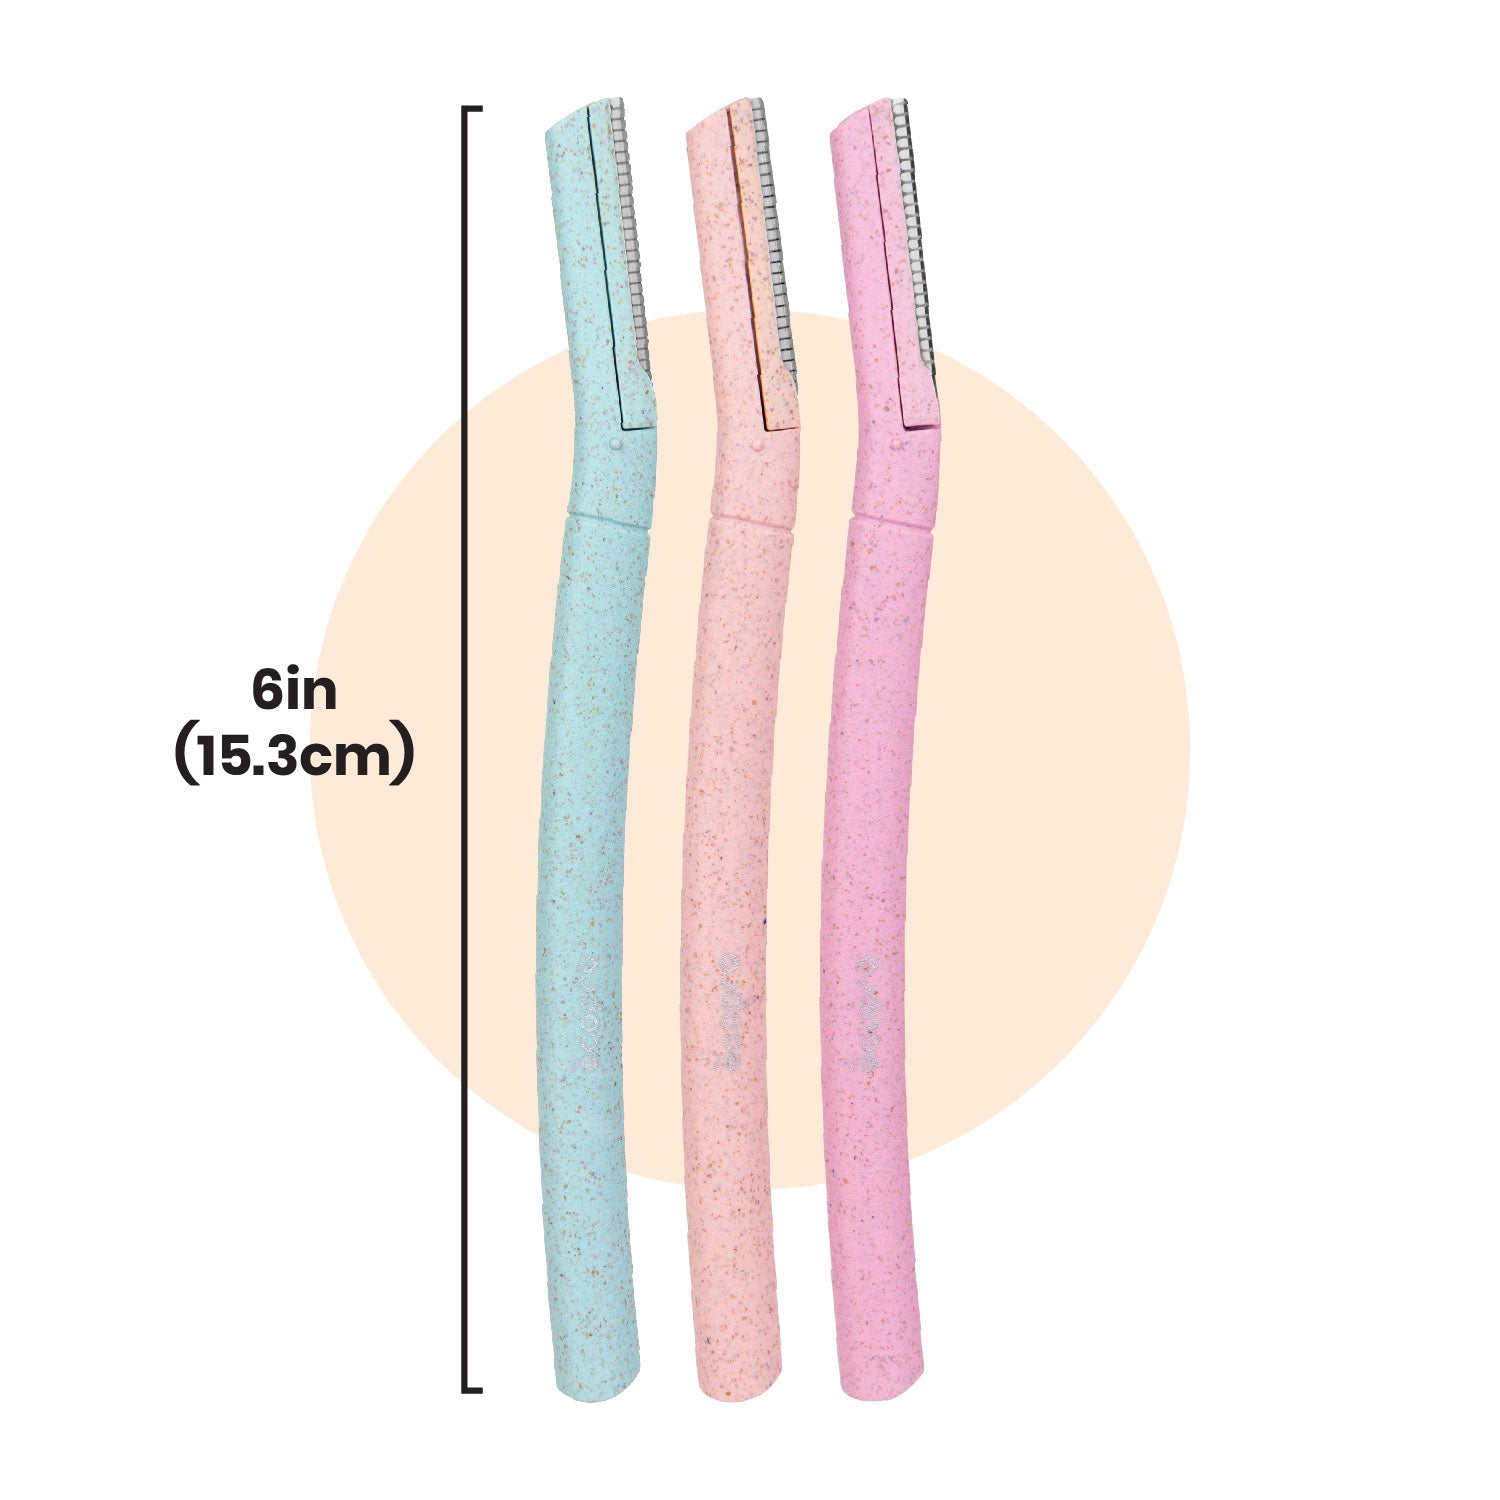 illustration showing the overall length of three different color ecopro biodegradable razors being 6 inches in length on a white background